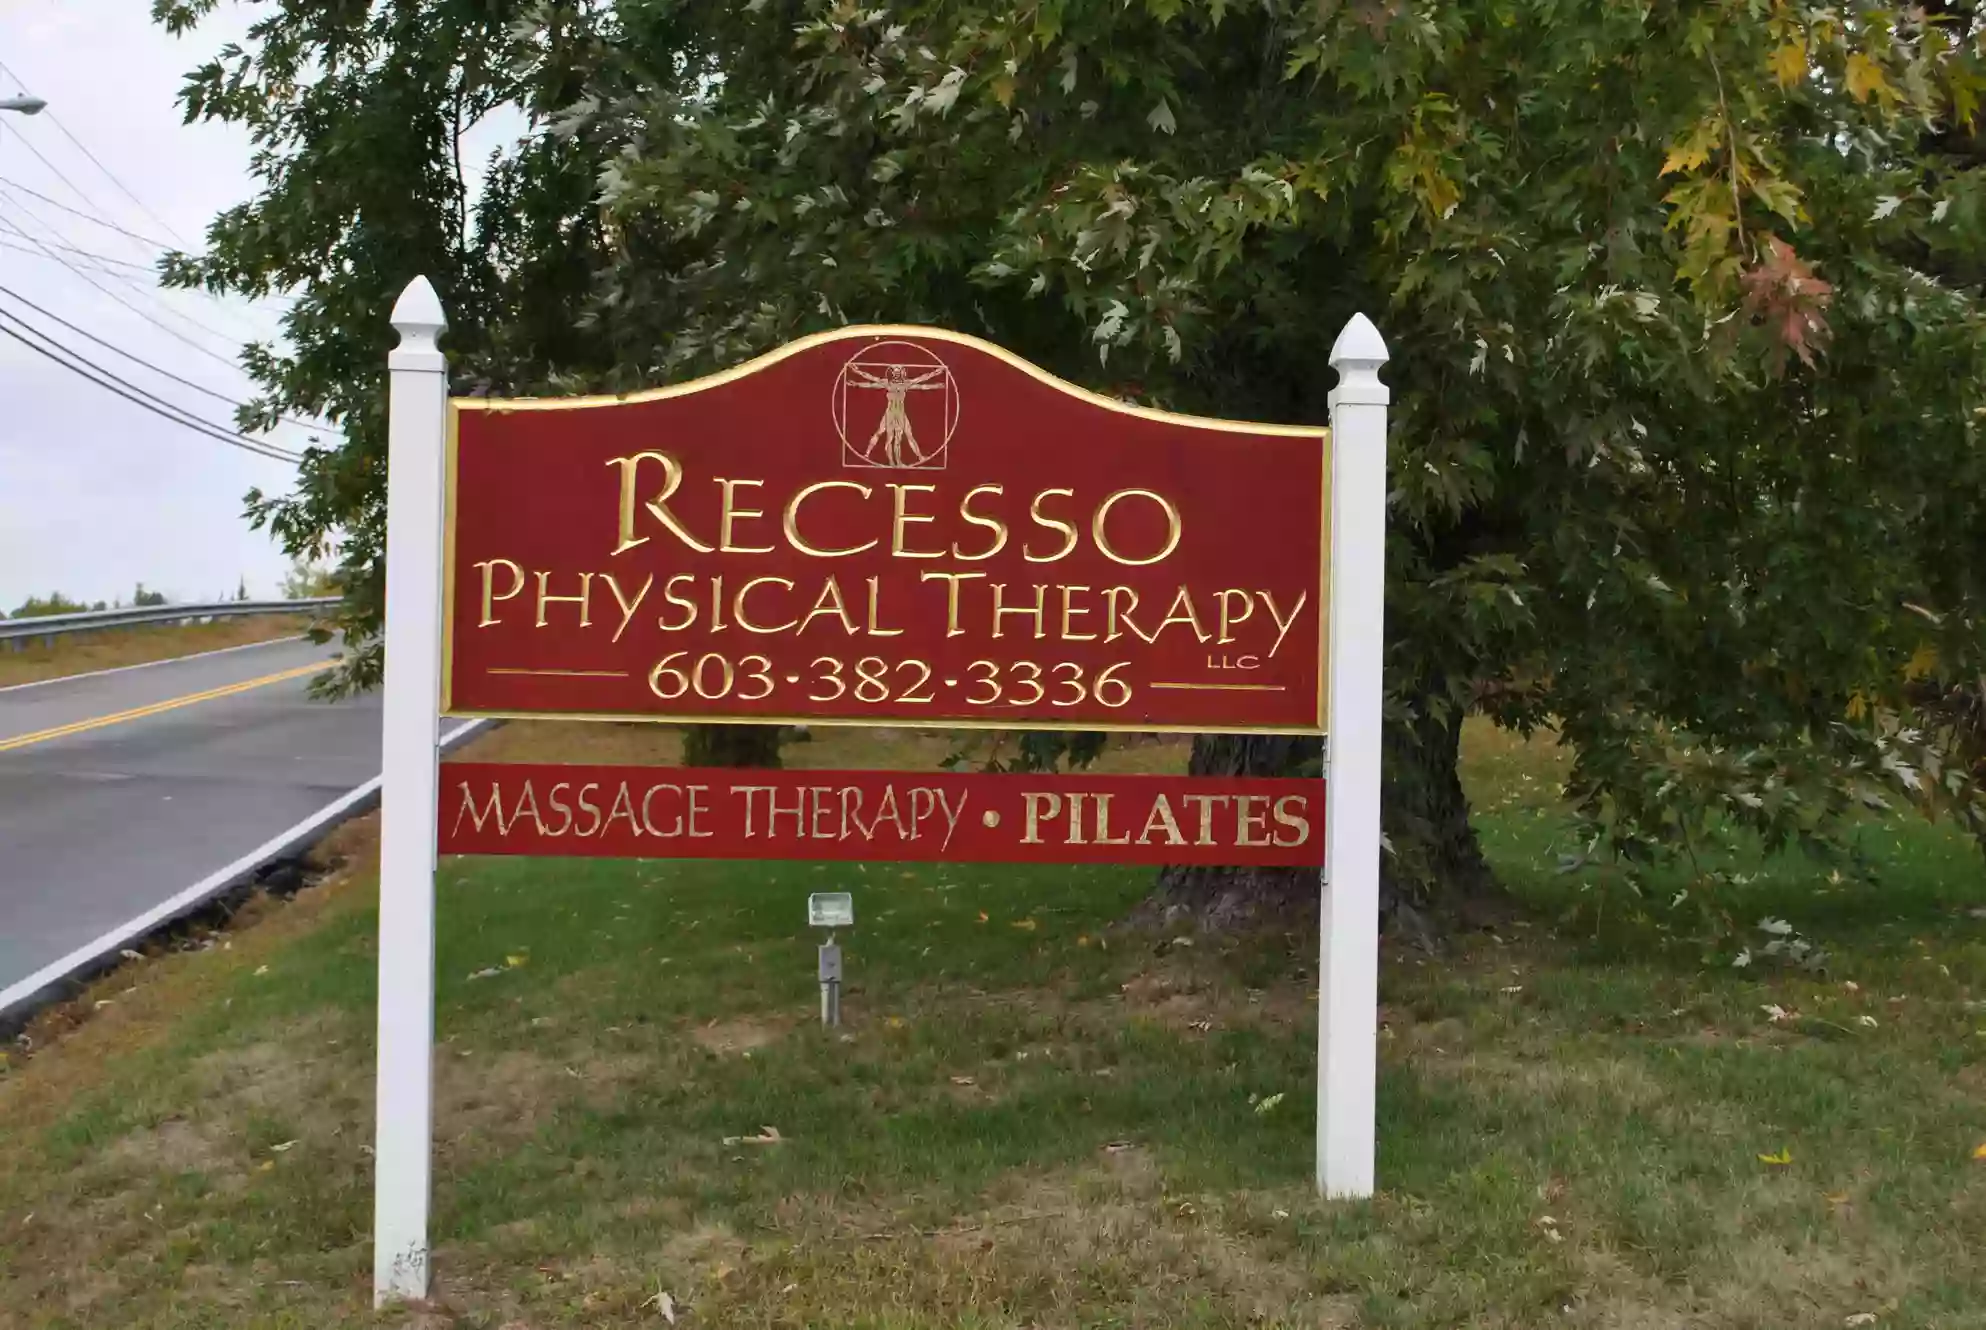 Recesso Physical Therapy